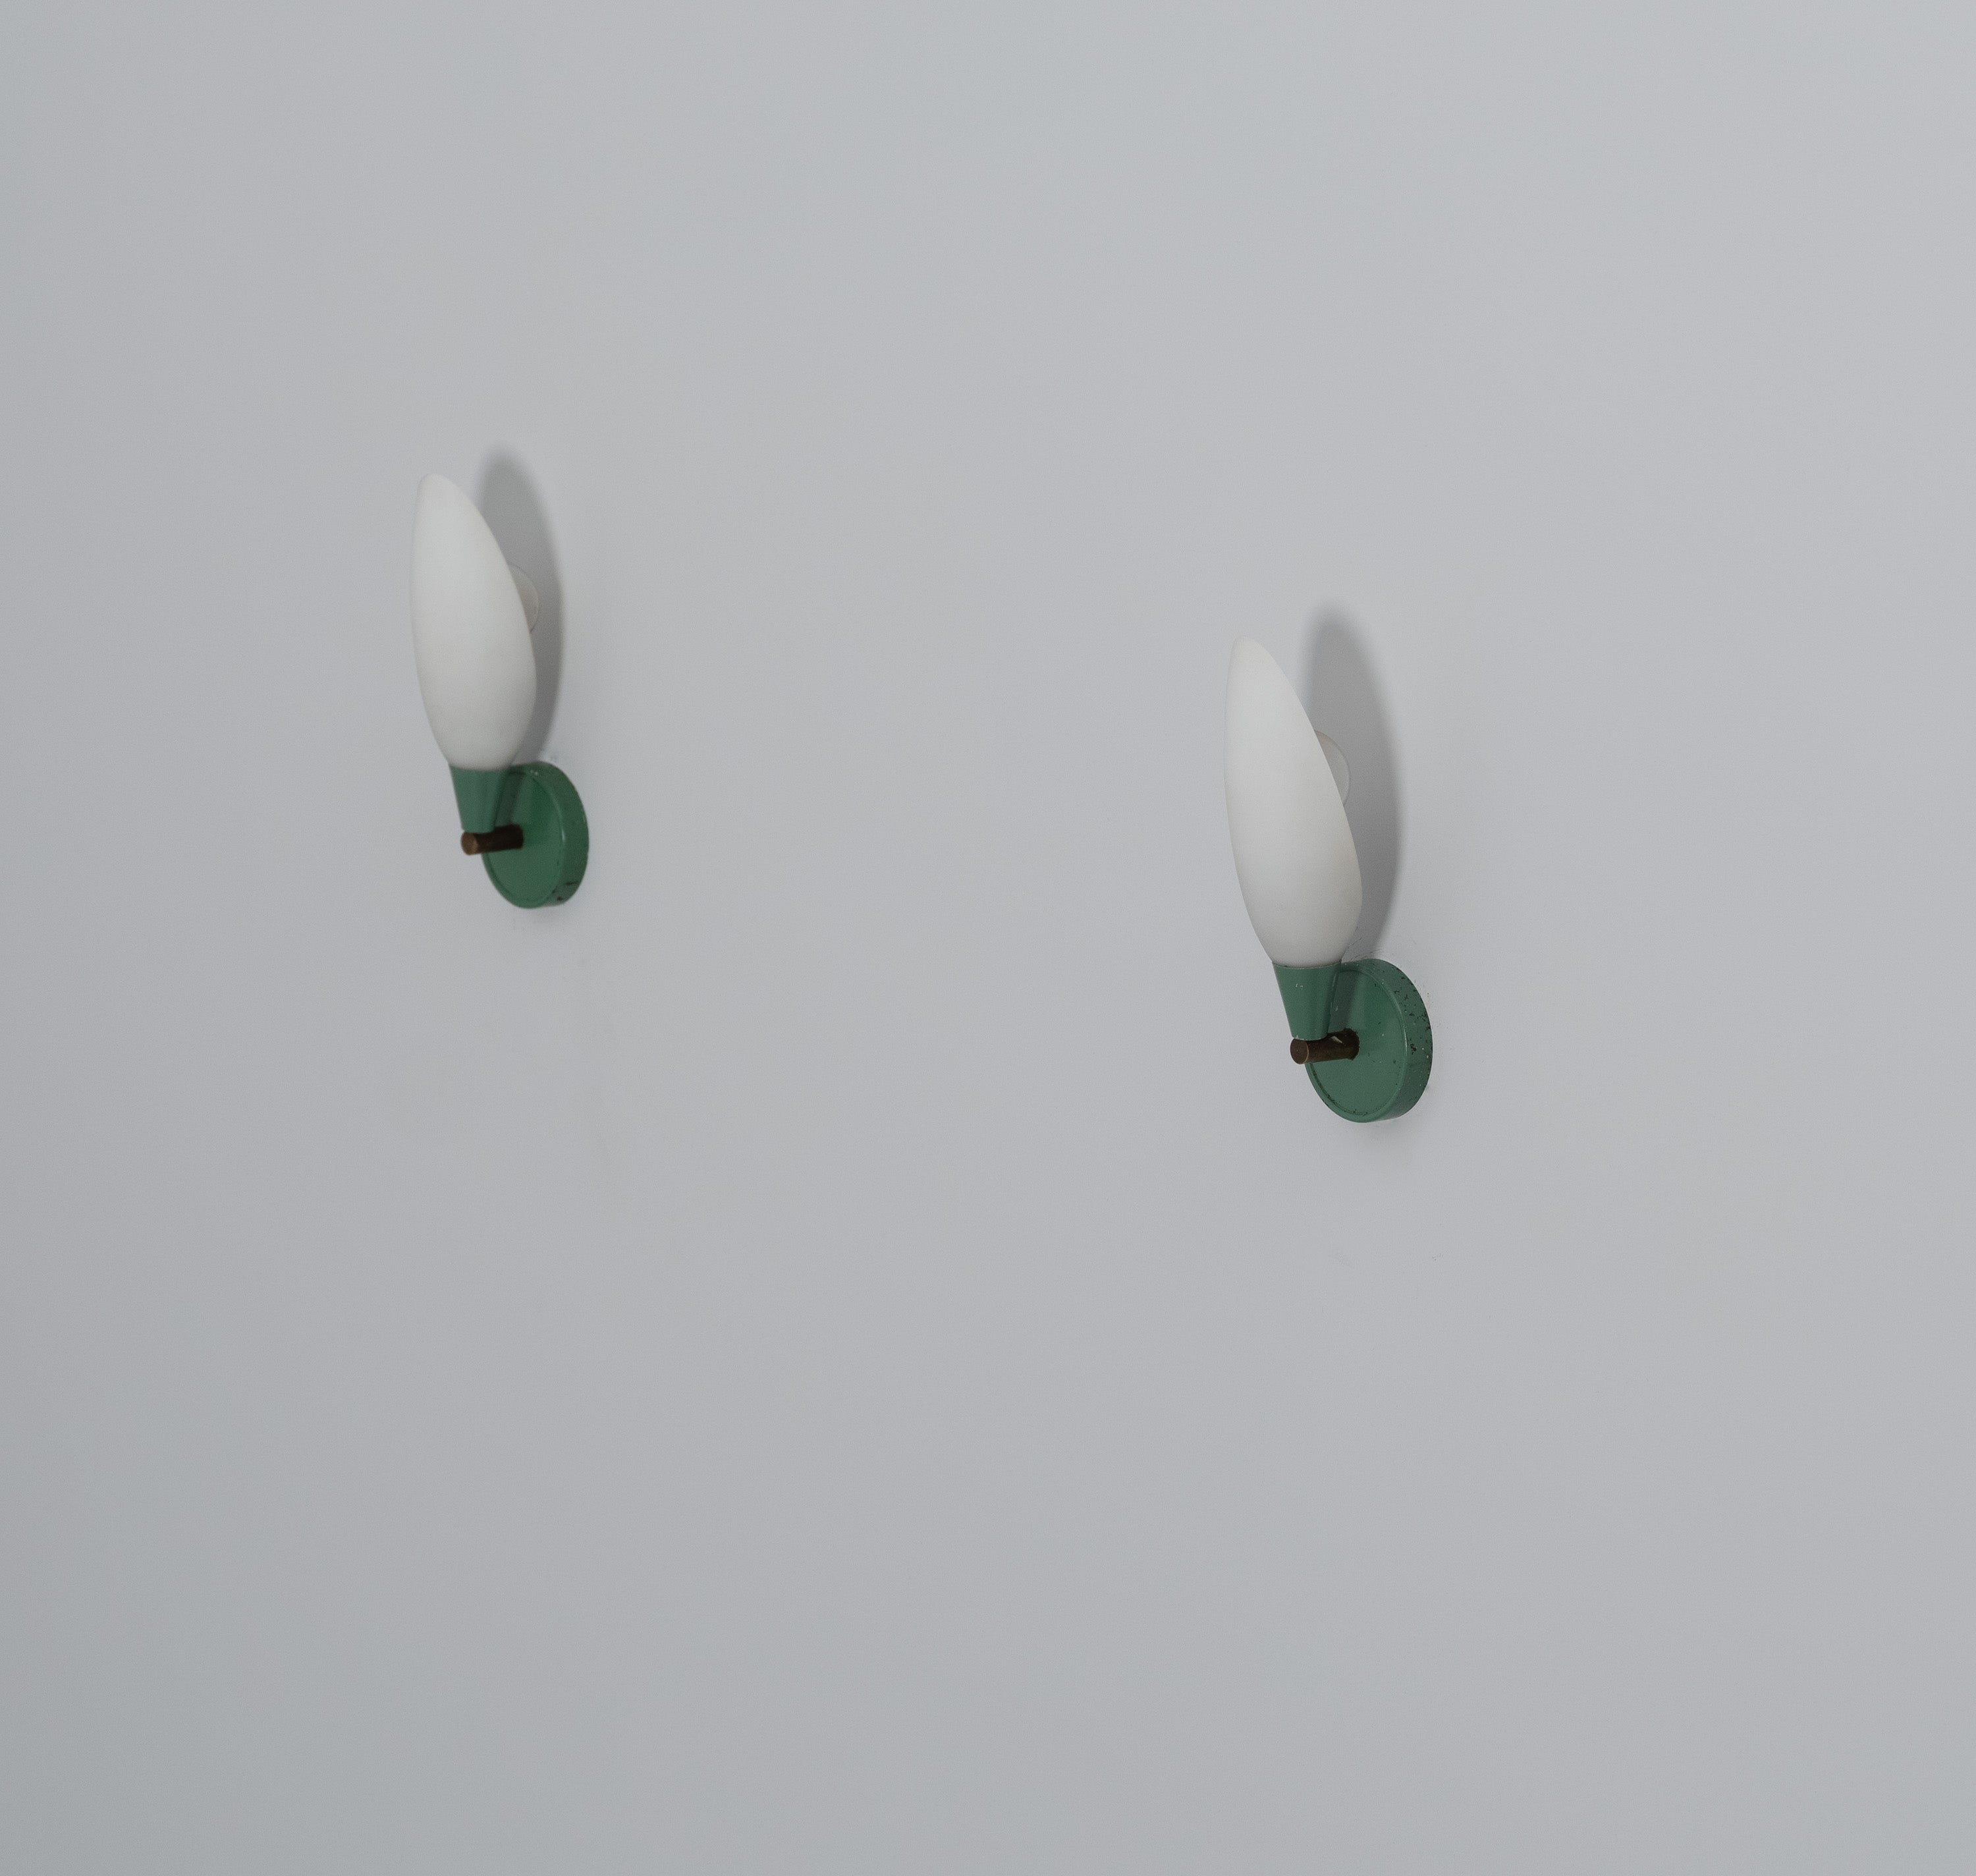 Pair of vintage appliqués manufactured in Italy during the 1950s.

This pair of wall lamps are made of green enameled metal, two opaline glasses and brass. 

This light have a modern and minimal typical Italian design of the 1950s.

Original